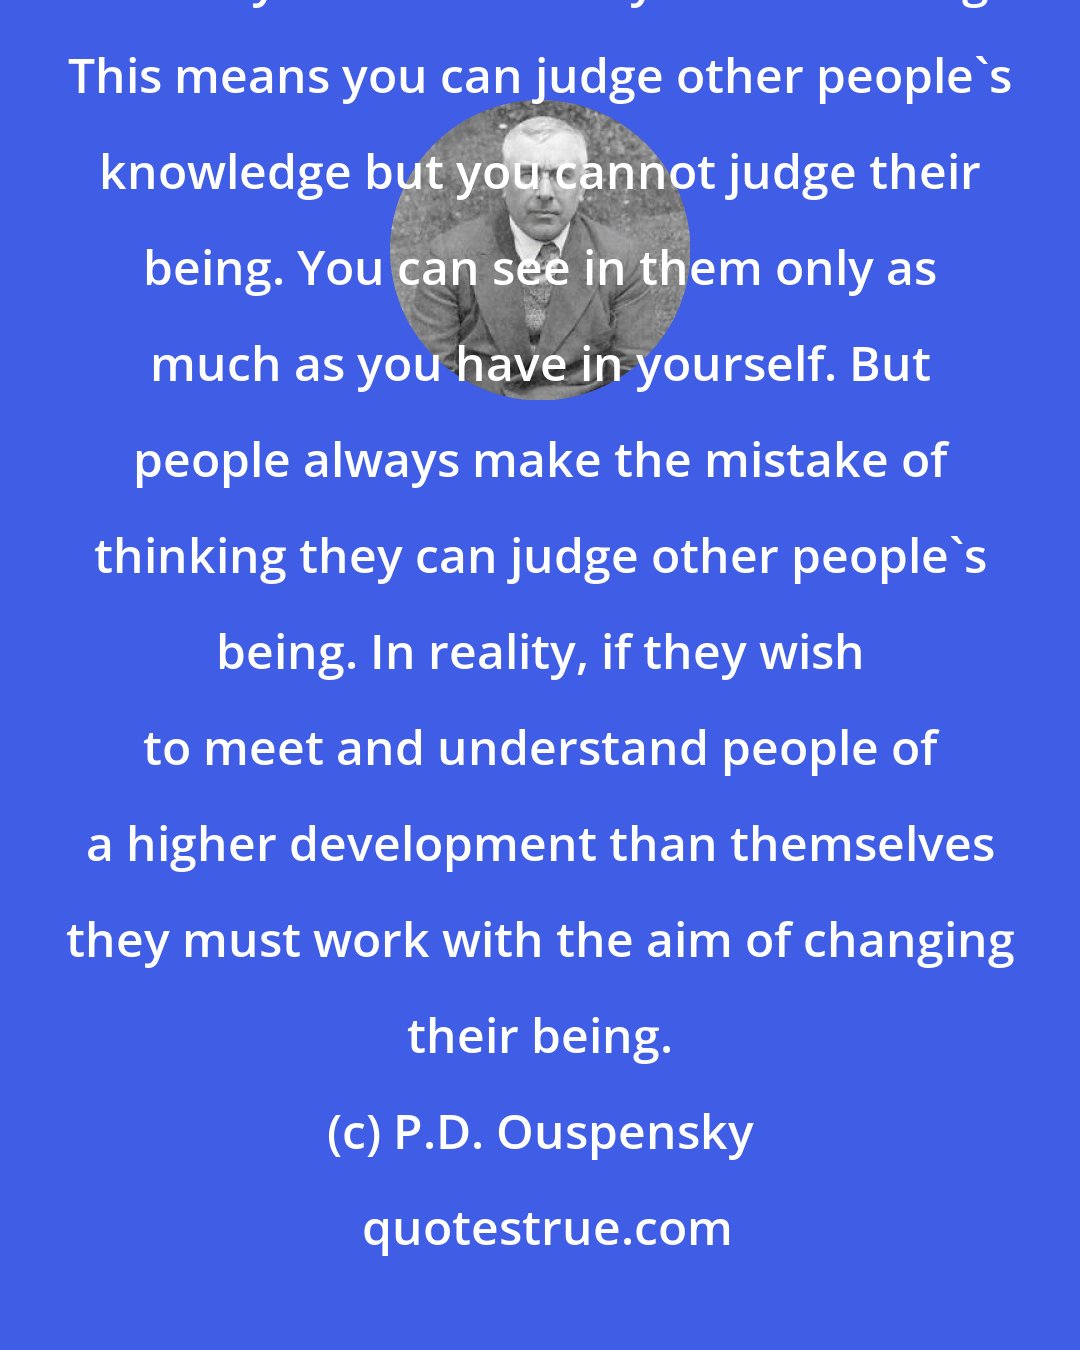 P.D. Ouspensky: You can understand other people only as much as you understand yourself and only on the level of your own being. This means you can judge other people's knowledge but you cannot judge their being. You can see in them only as much as you have in yourself. But people always make the mistake of thinking they can judge other people's being. In reality, if they wish to meet and understand people of a higher development than themselves they must work with the aim of changing their being.